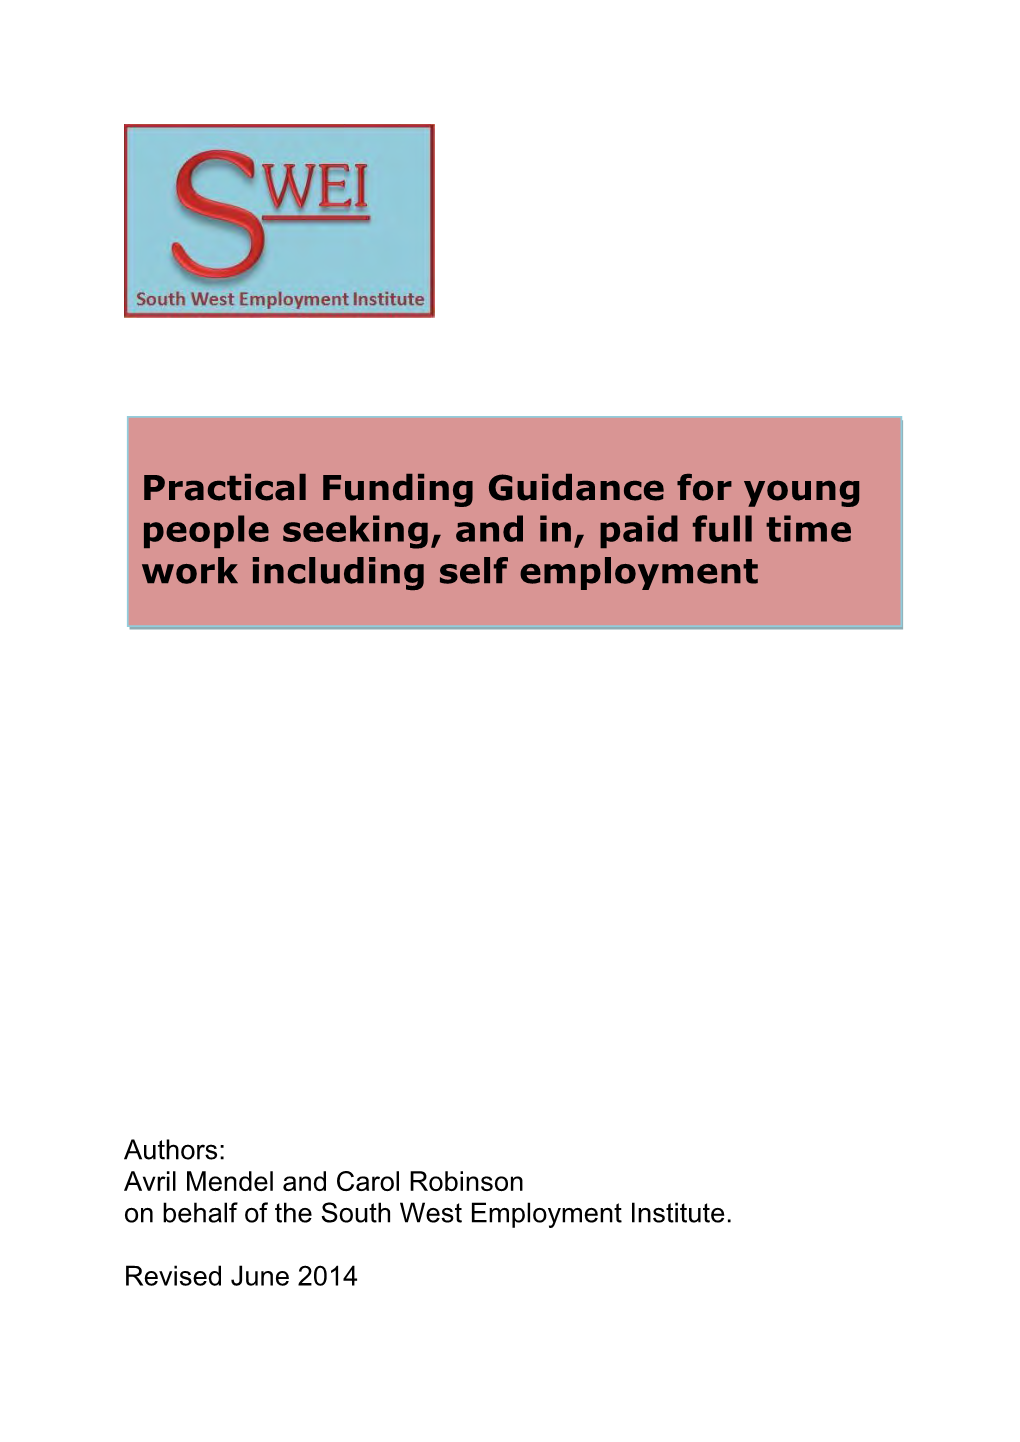 Practical Funding Guidance for Young People Seeking, and In, Paid Full Time